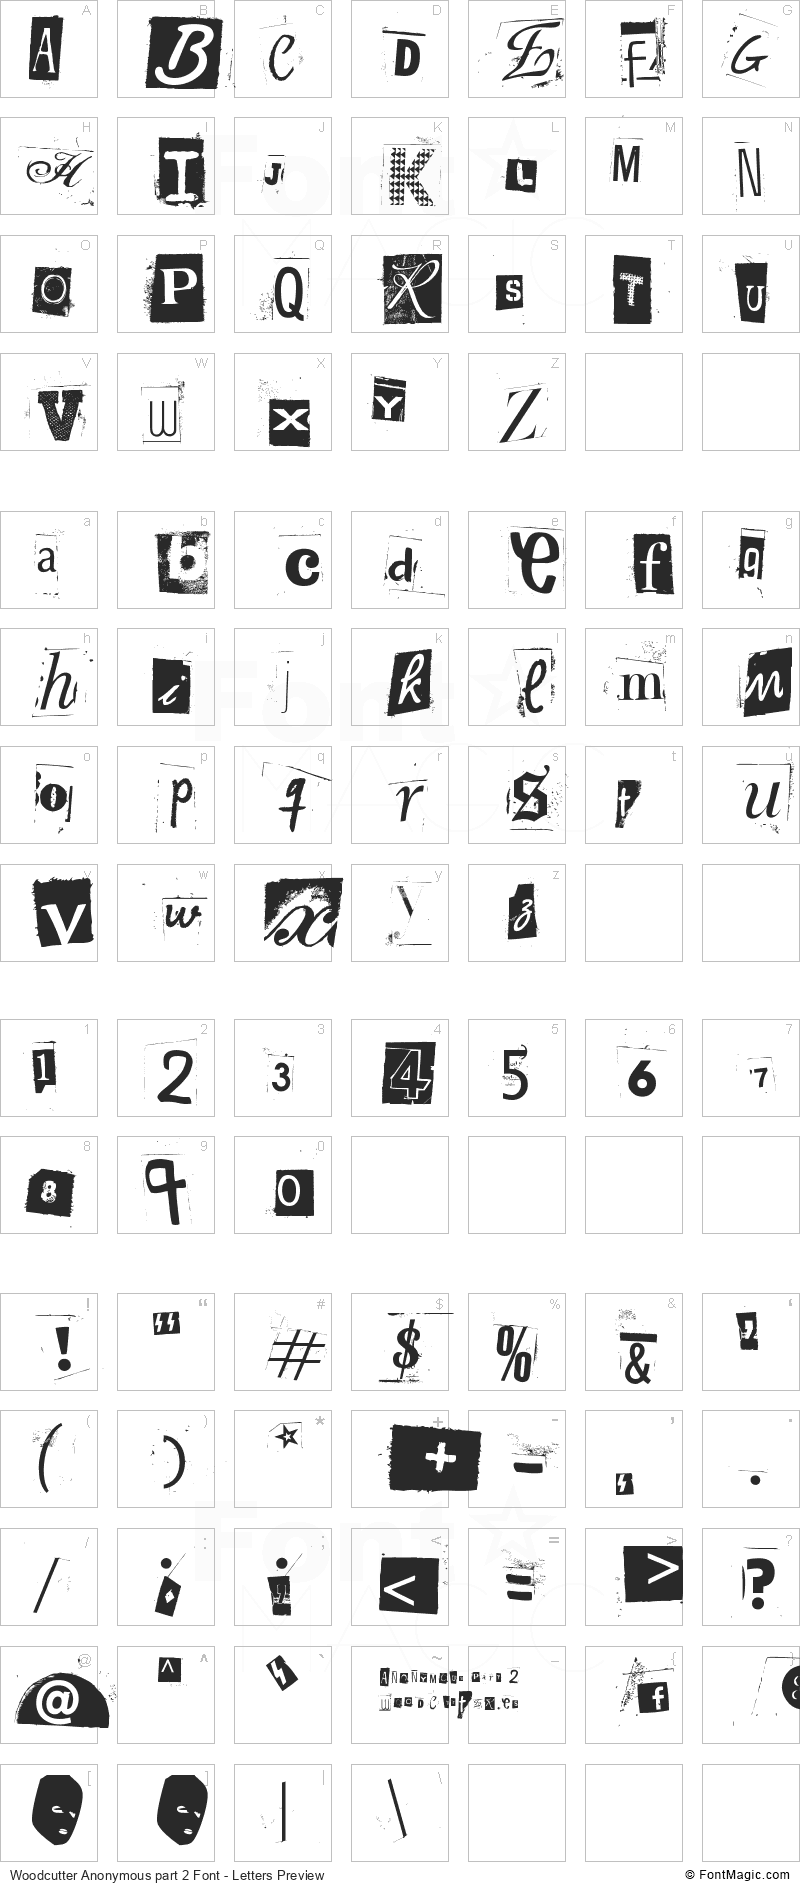 Woodcutter Anonymous part 2 Font - All Latters Preview Chart